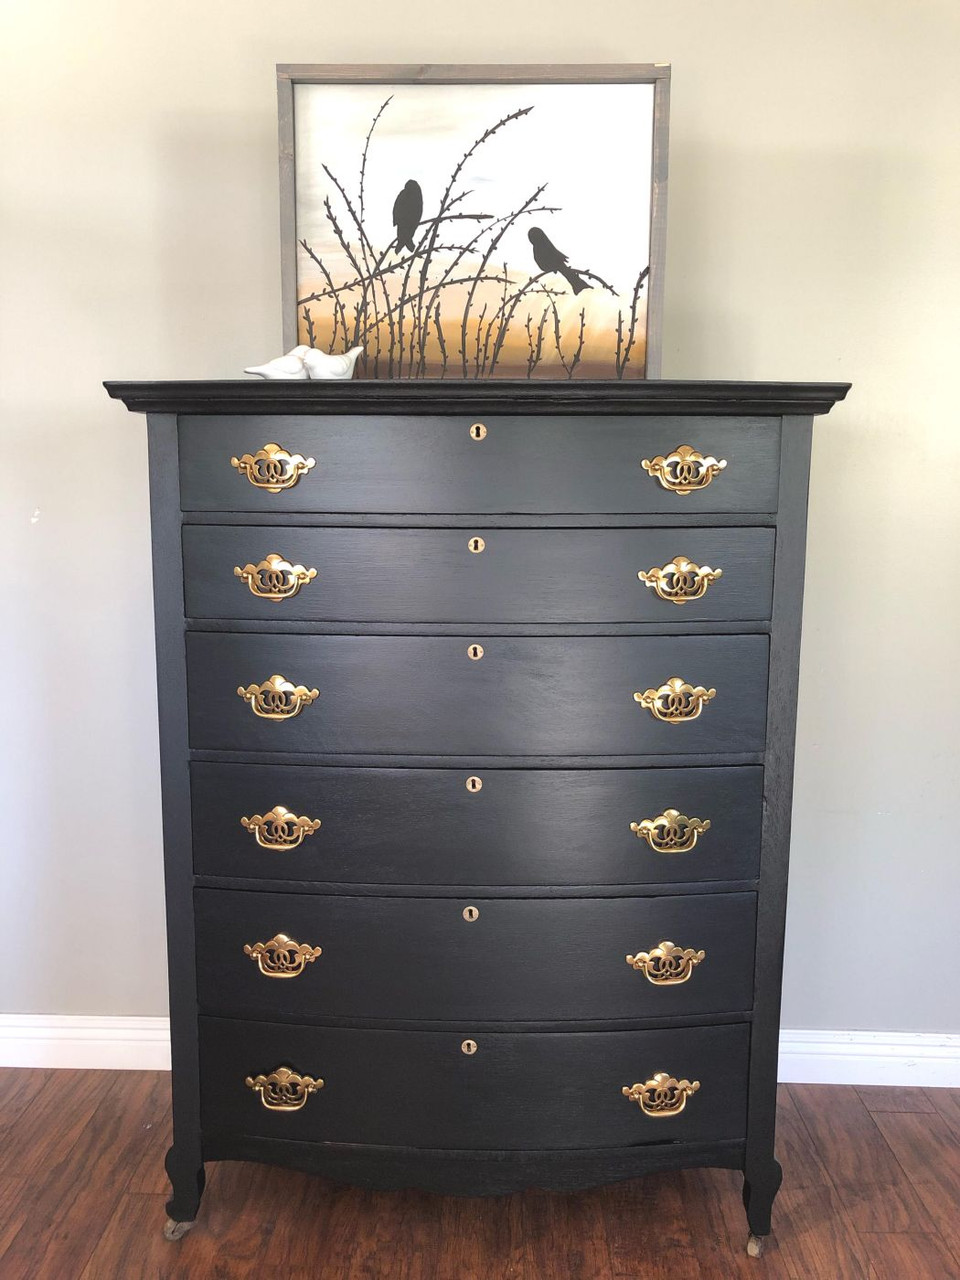 https://cdn11.bigcommerce.com/s-mul8093wwg/images/stencil/1280x1280/products/15073/34483/chippendale-satin-brass-bail-pull-and-dresser-1__66412.1645205941.jpg?c=1